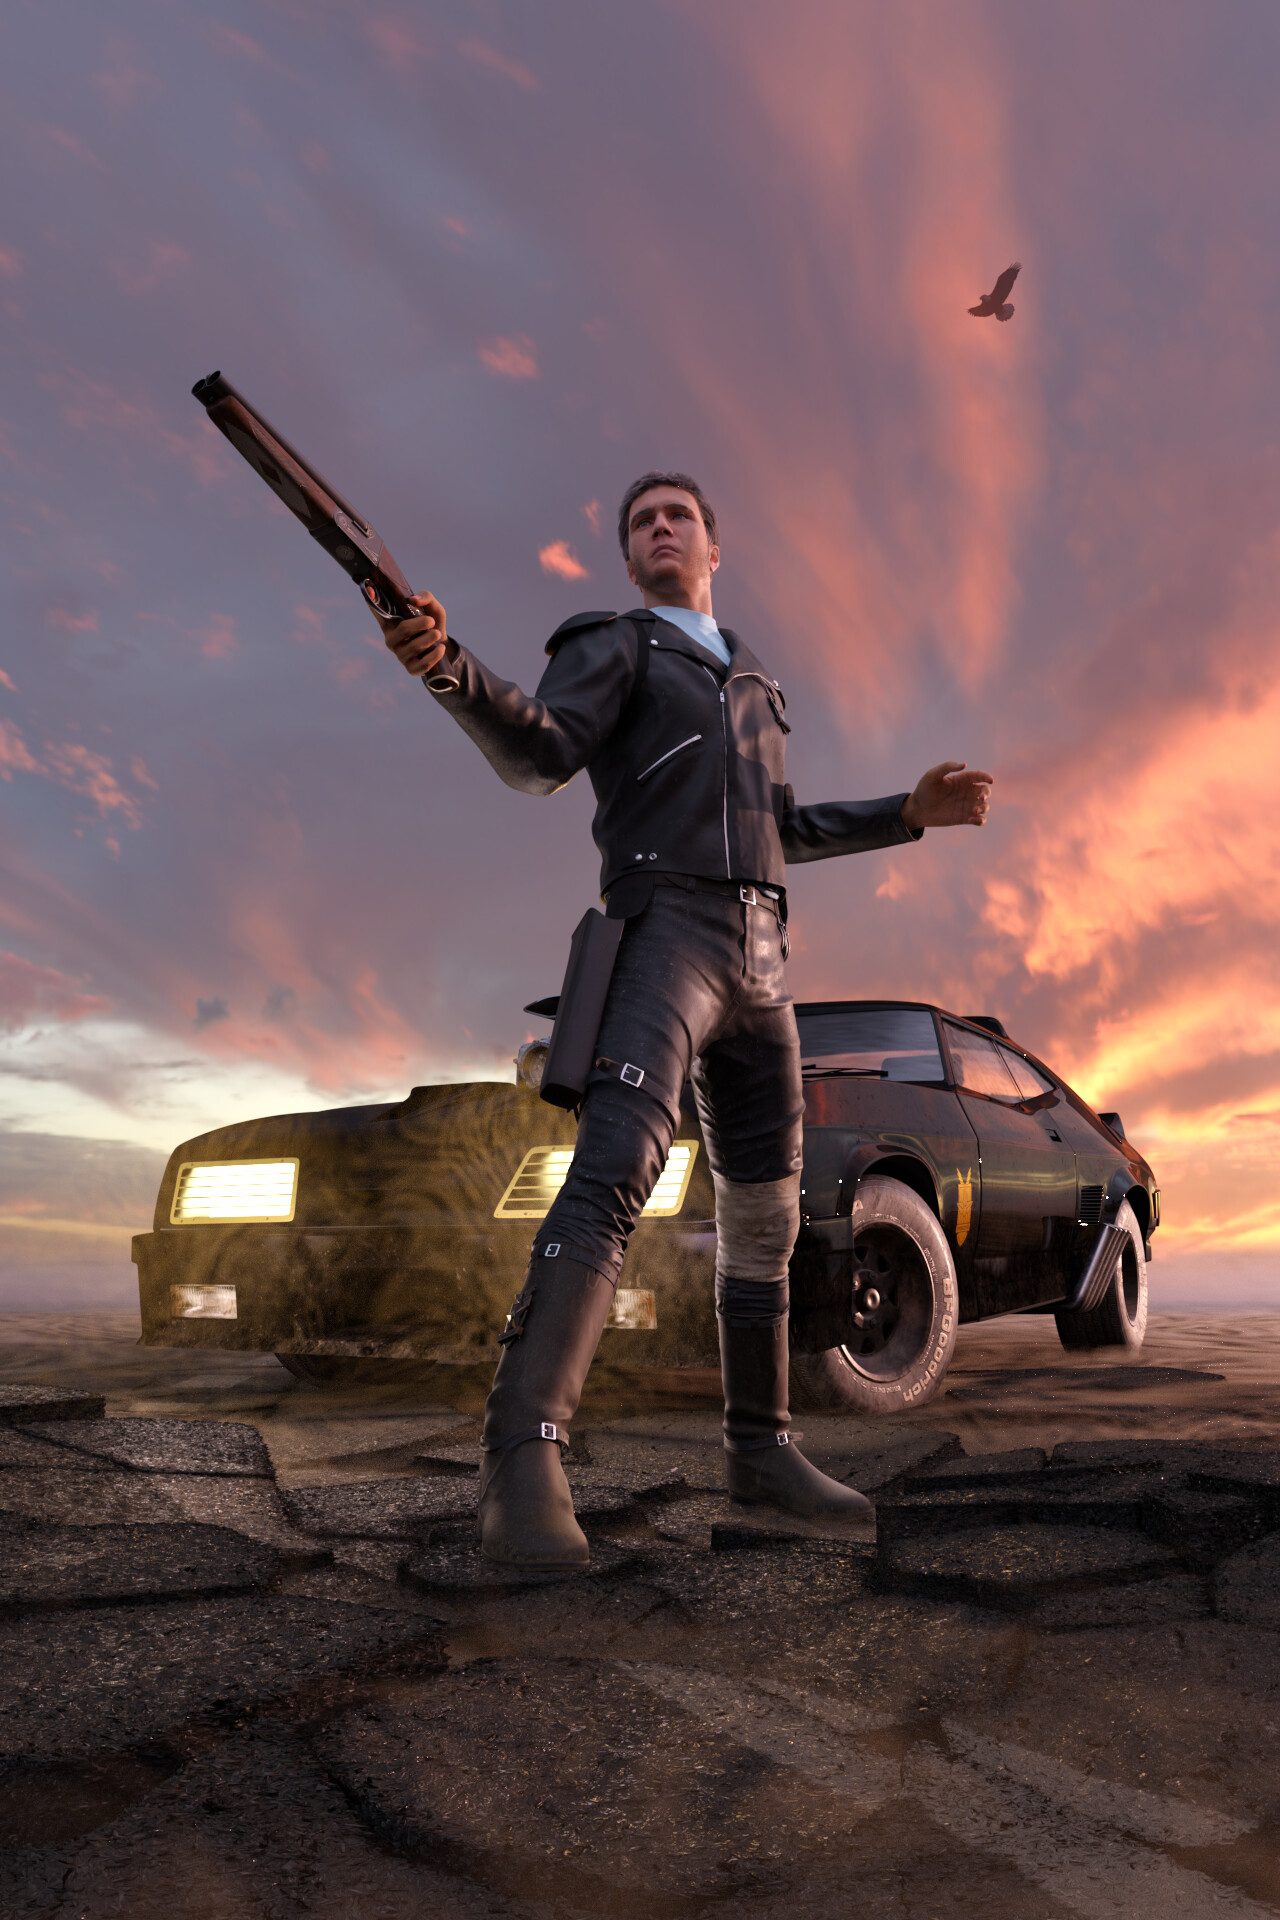 Mad Max - Finished Projects - Blender Artists Community